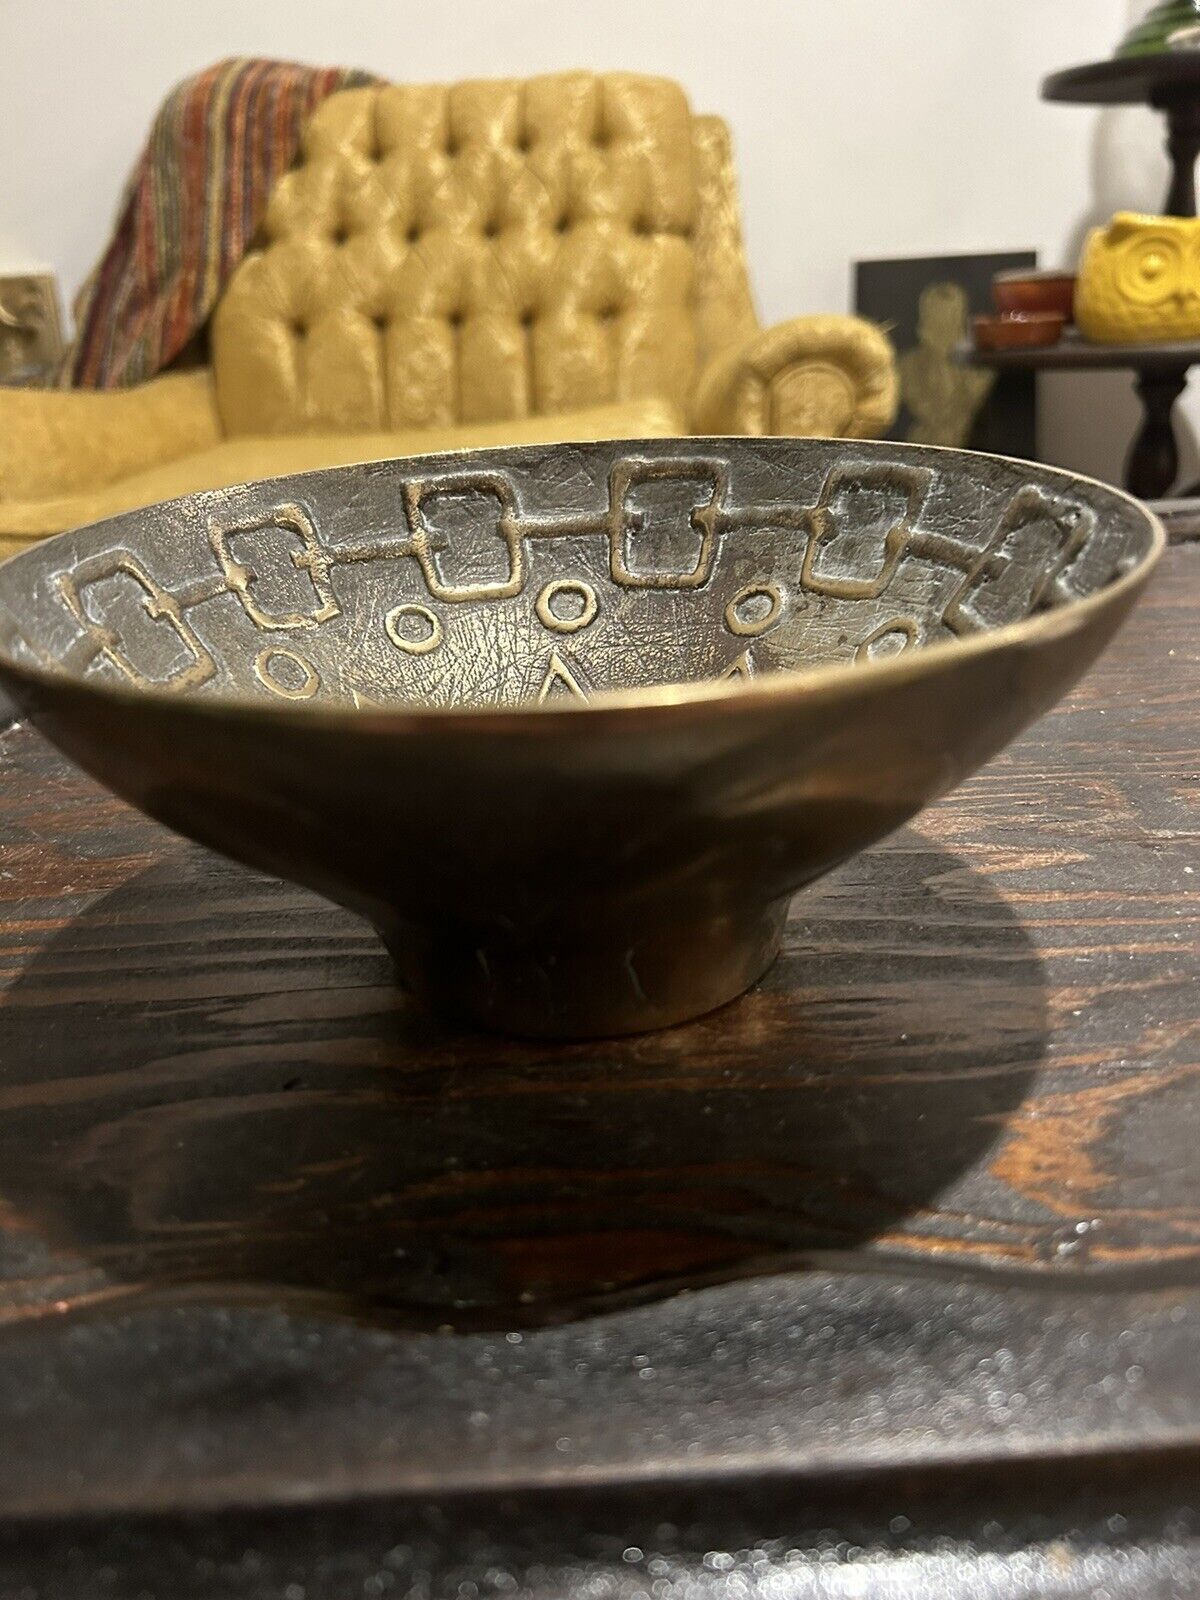 Beautiful Vintage Solid Brass Bowl from Korea 7” Geometric Shapes. Heavy